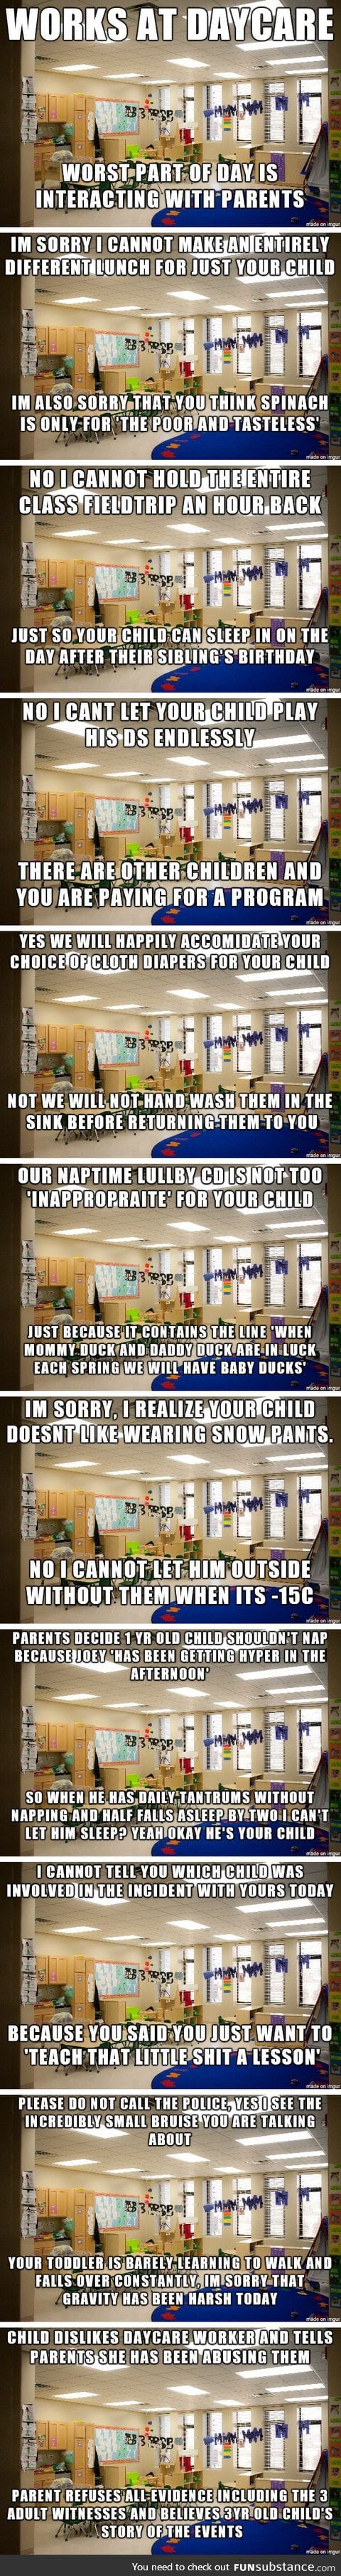 Daycare stories